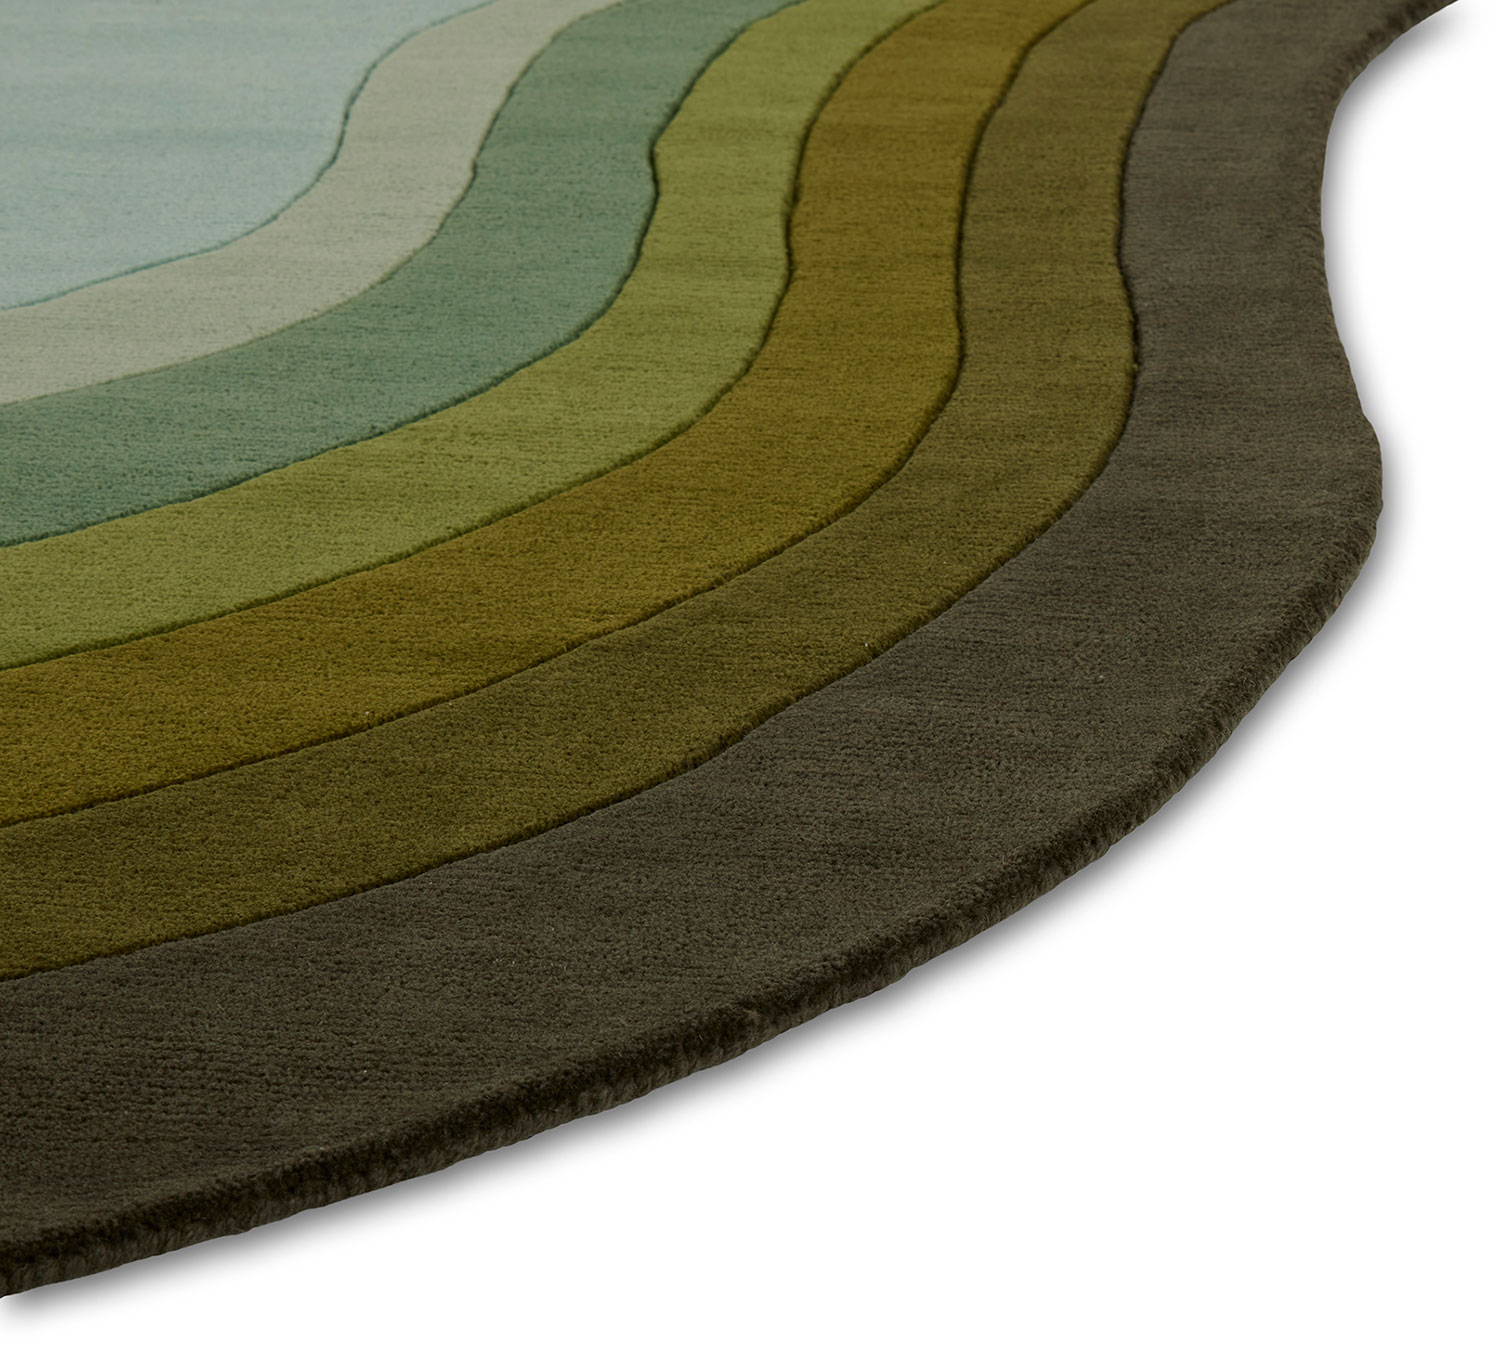 A close up of a green gradient area rug called Pool Woodland in the shape of a pool